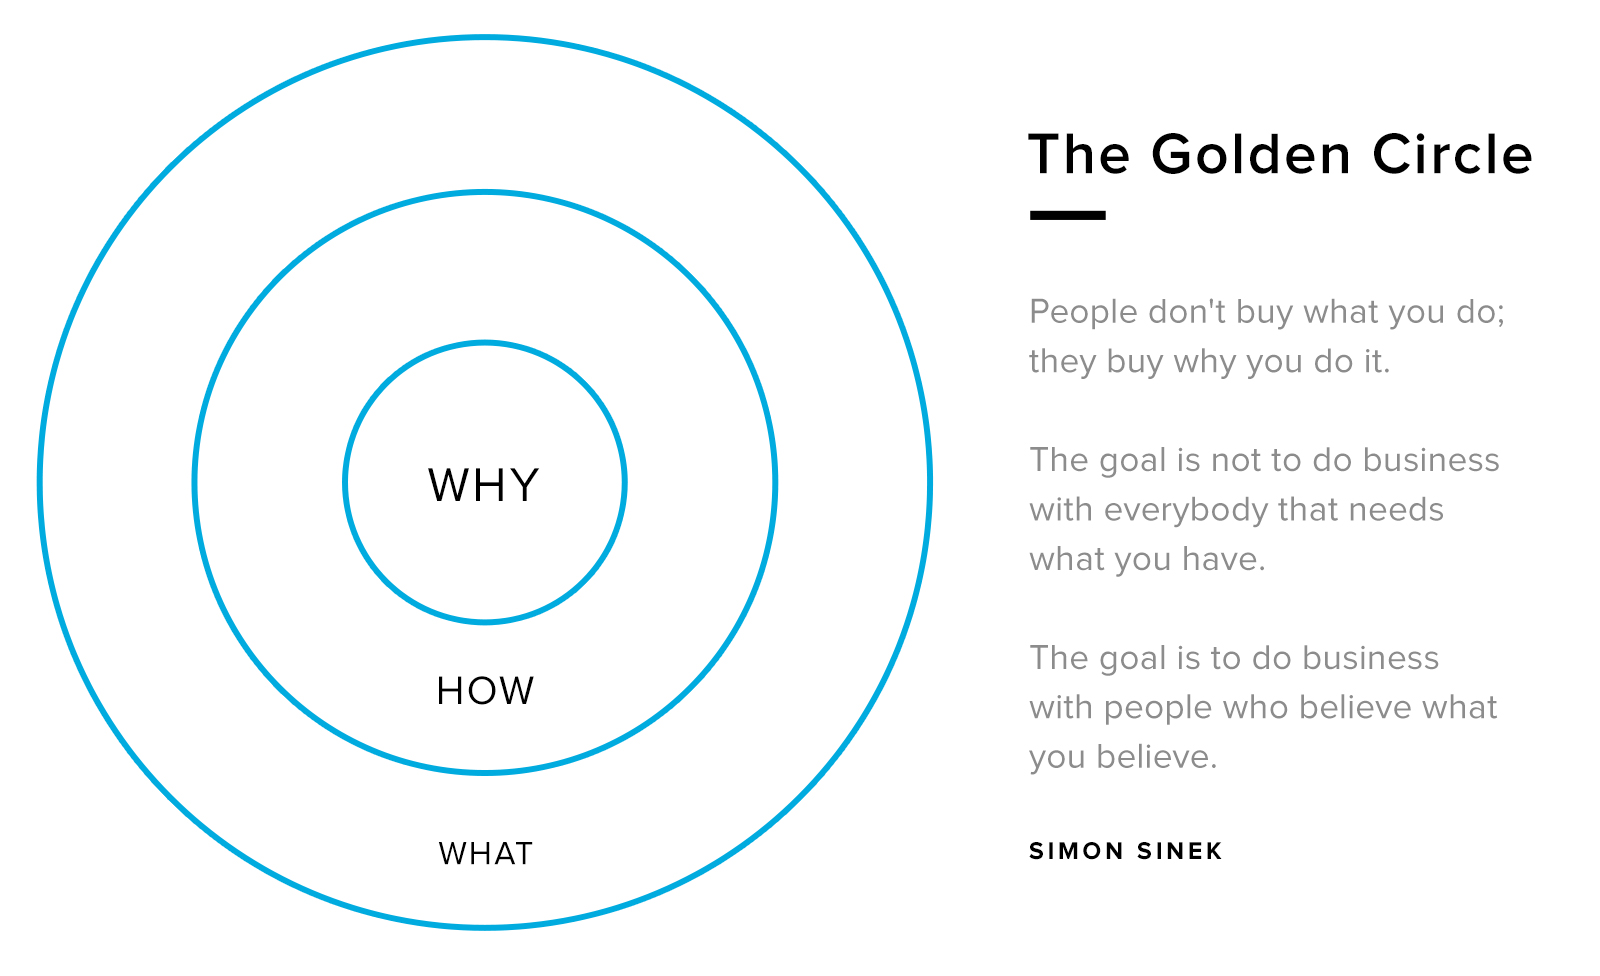 Brand purpose with The Golden Circle by Simon Sinek